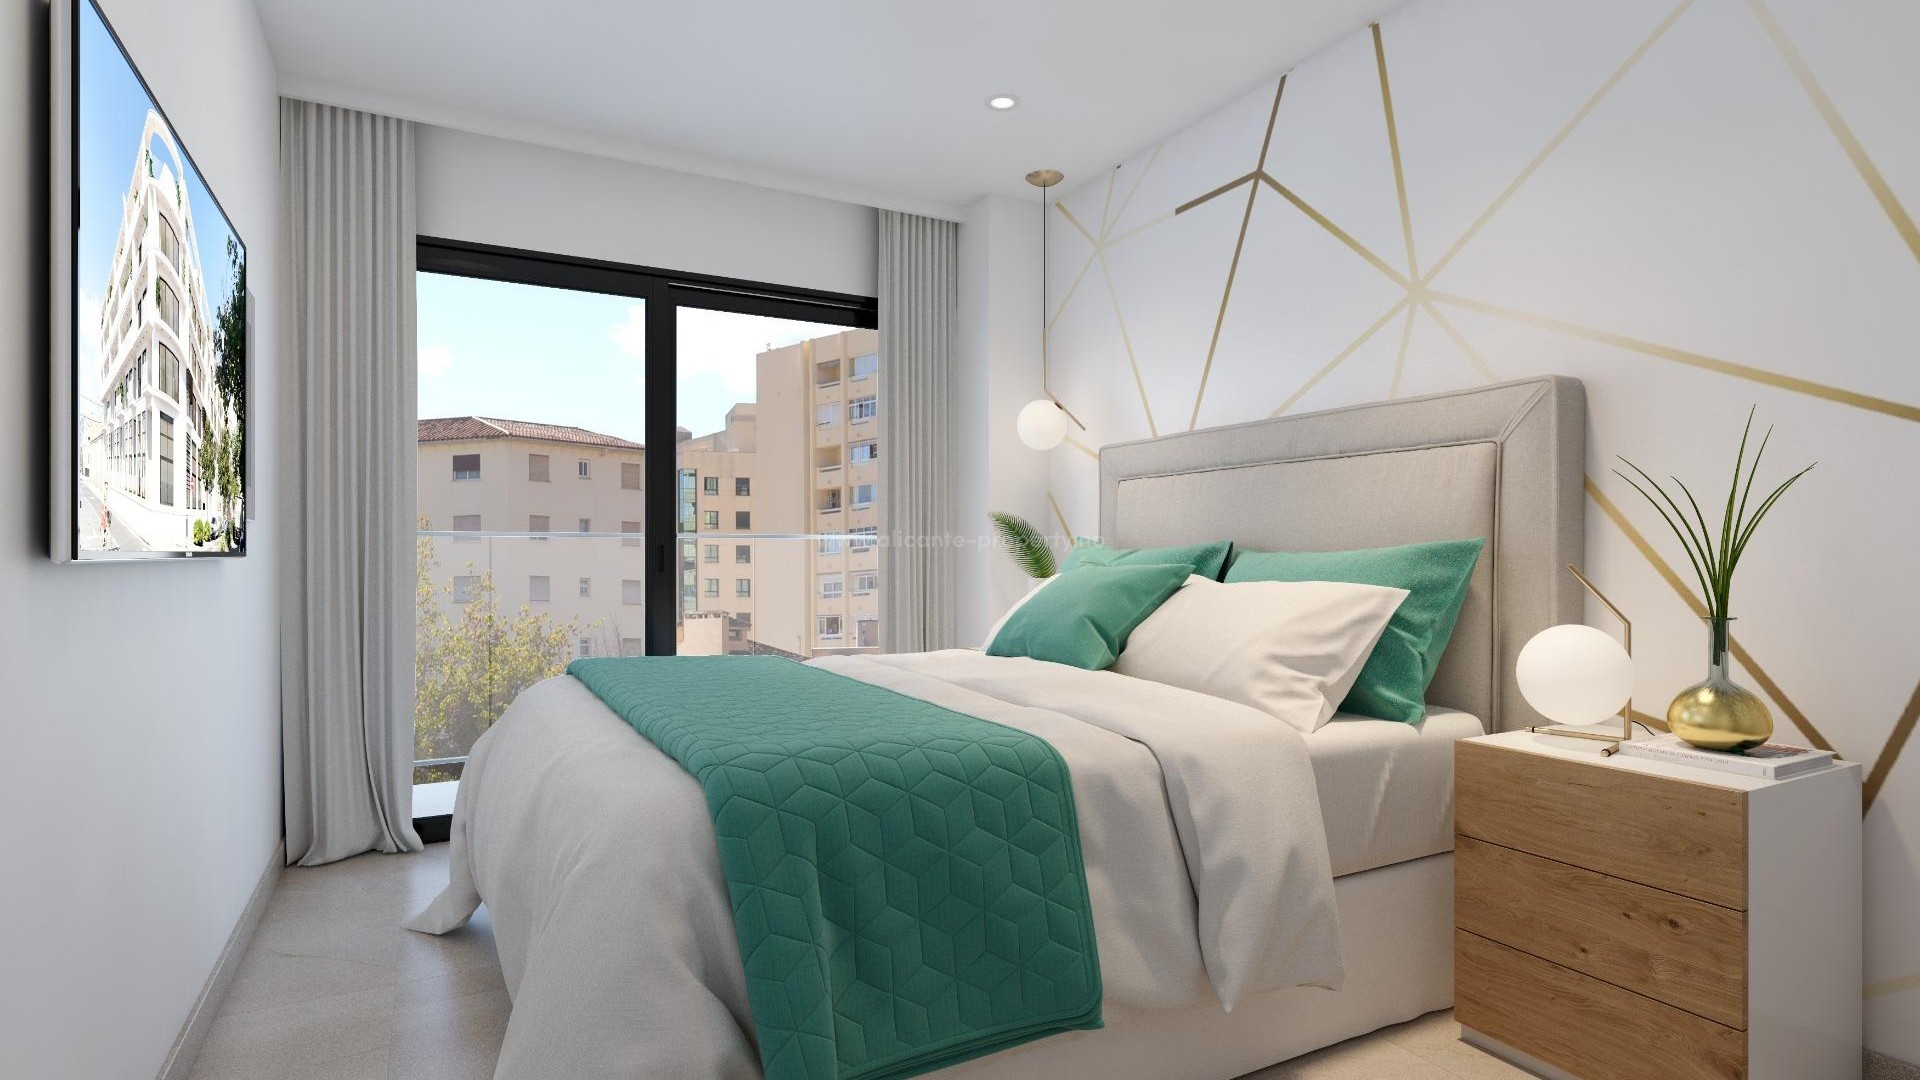 61 apartments and penthouses in Alicante city, 2/3/4 bedrooms, 2 bathrooms, shared roof terrace with swimming pools for adults and children, green areas